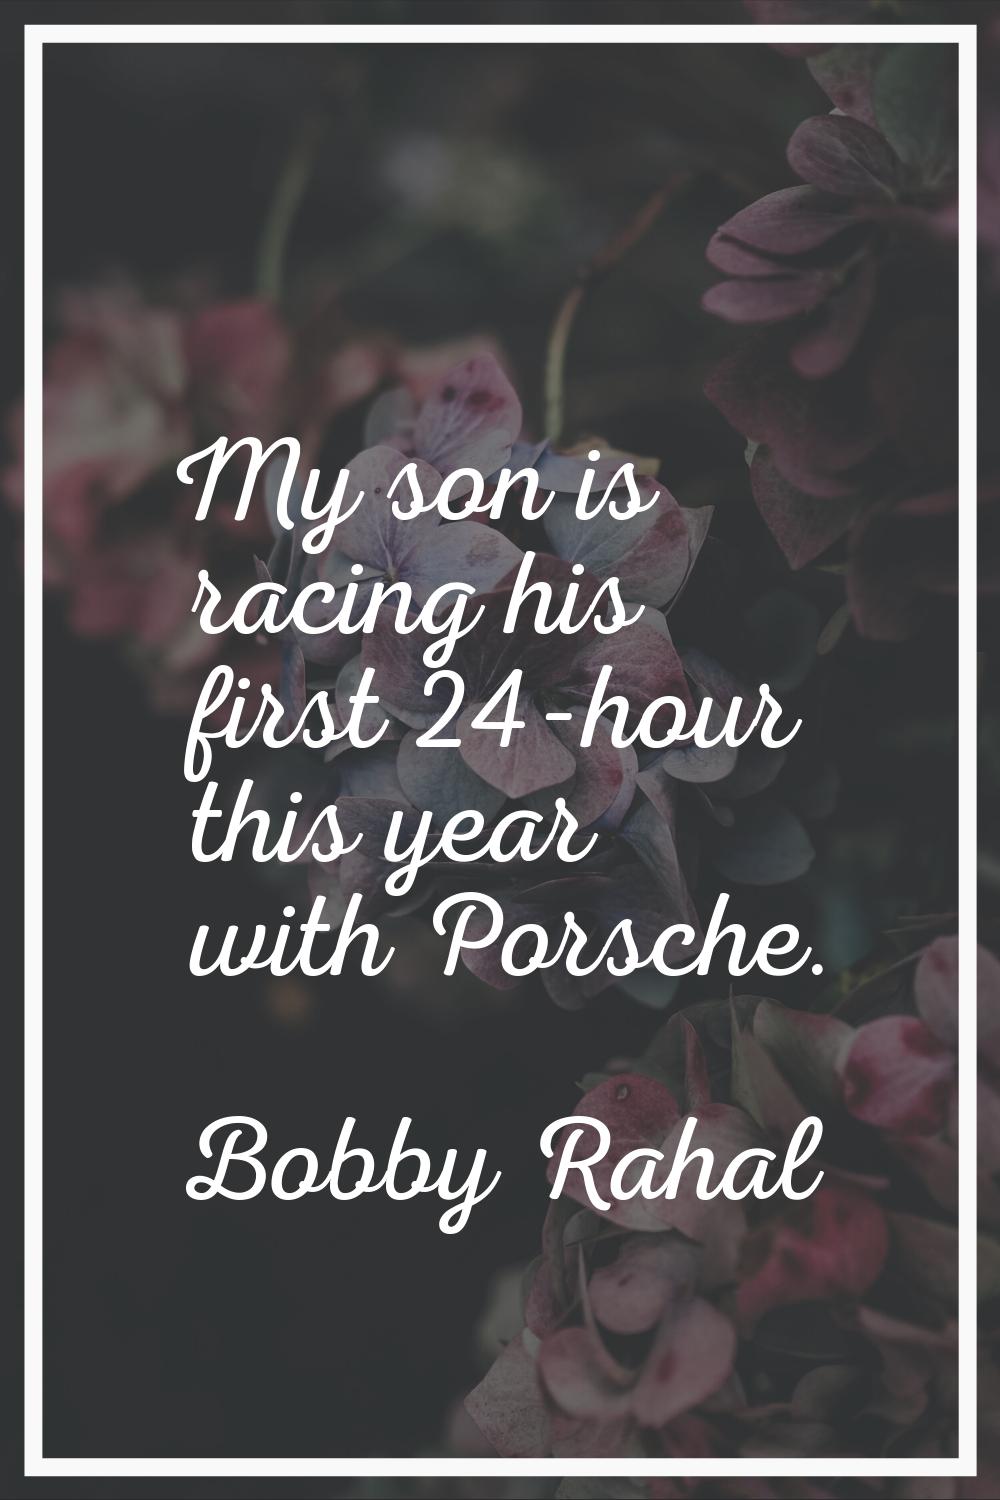 My son is racing his first 24-hour this year with Porsche.